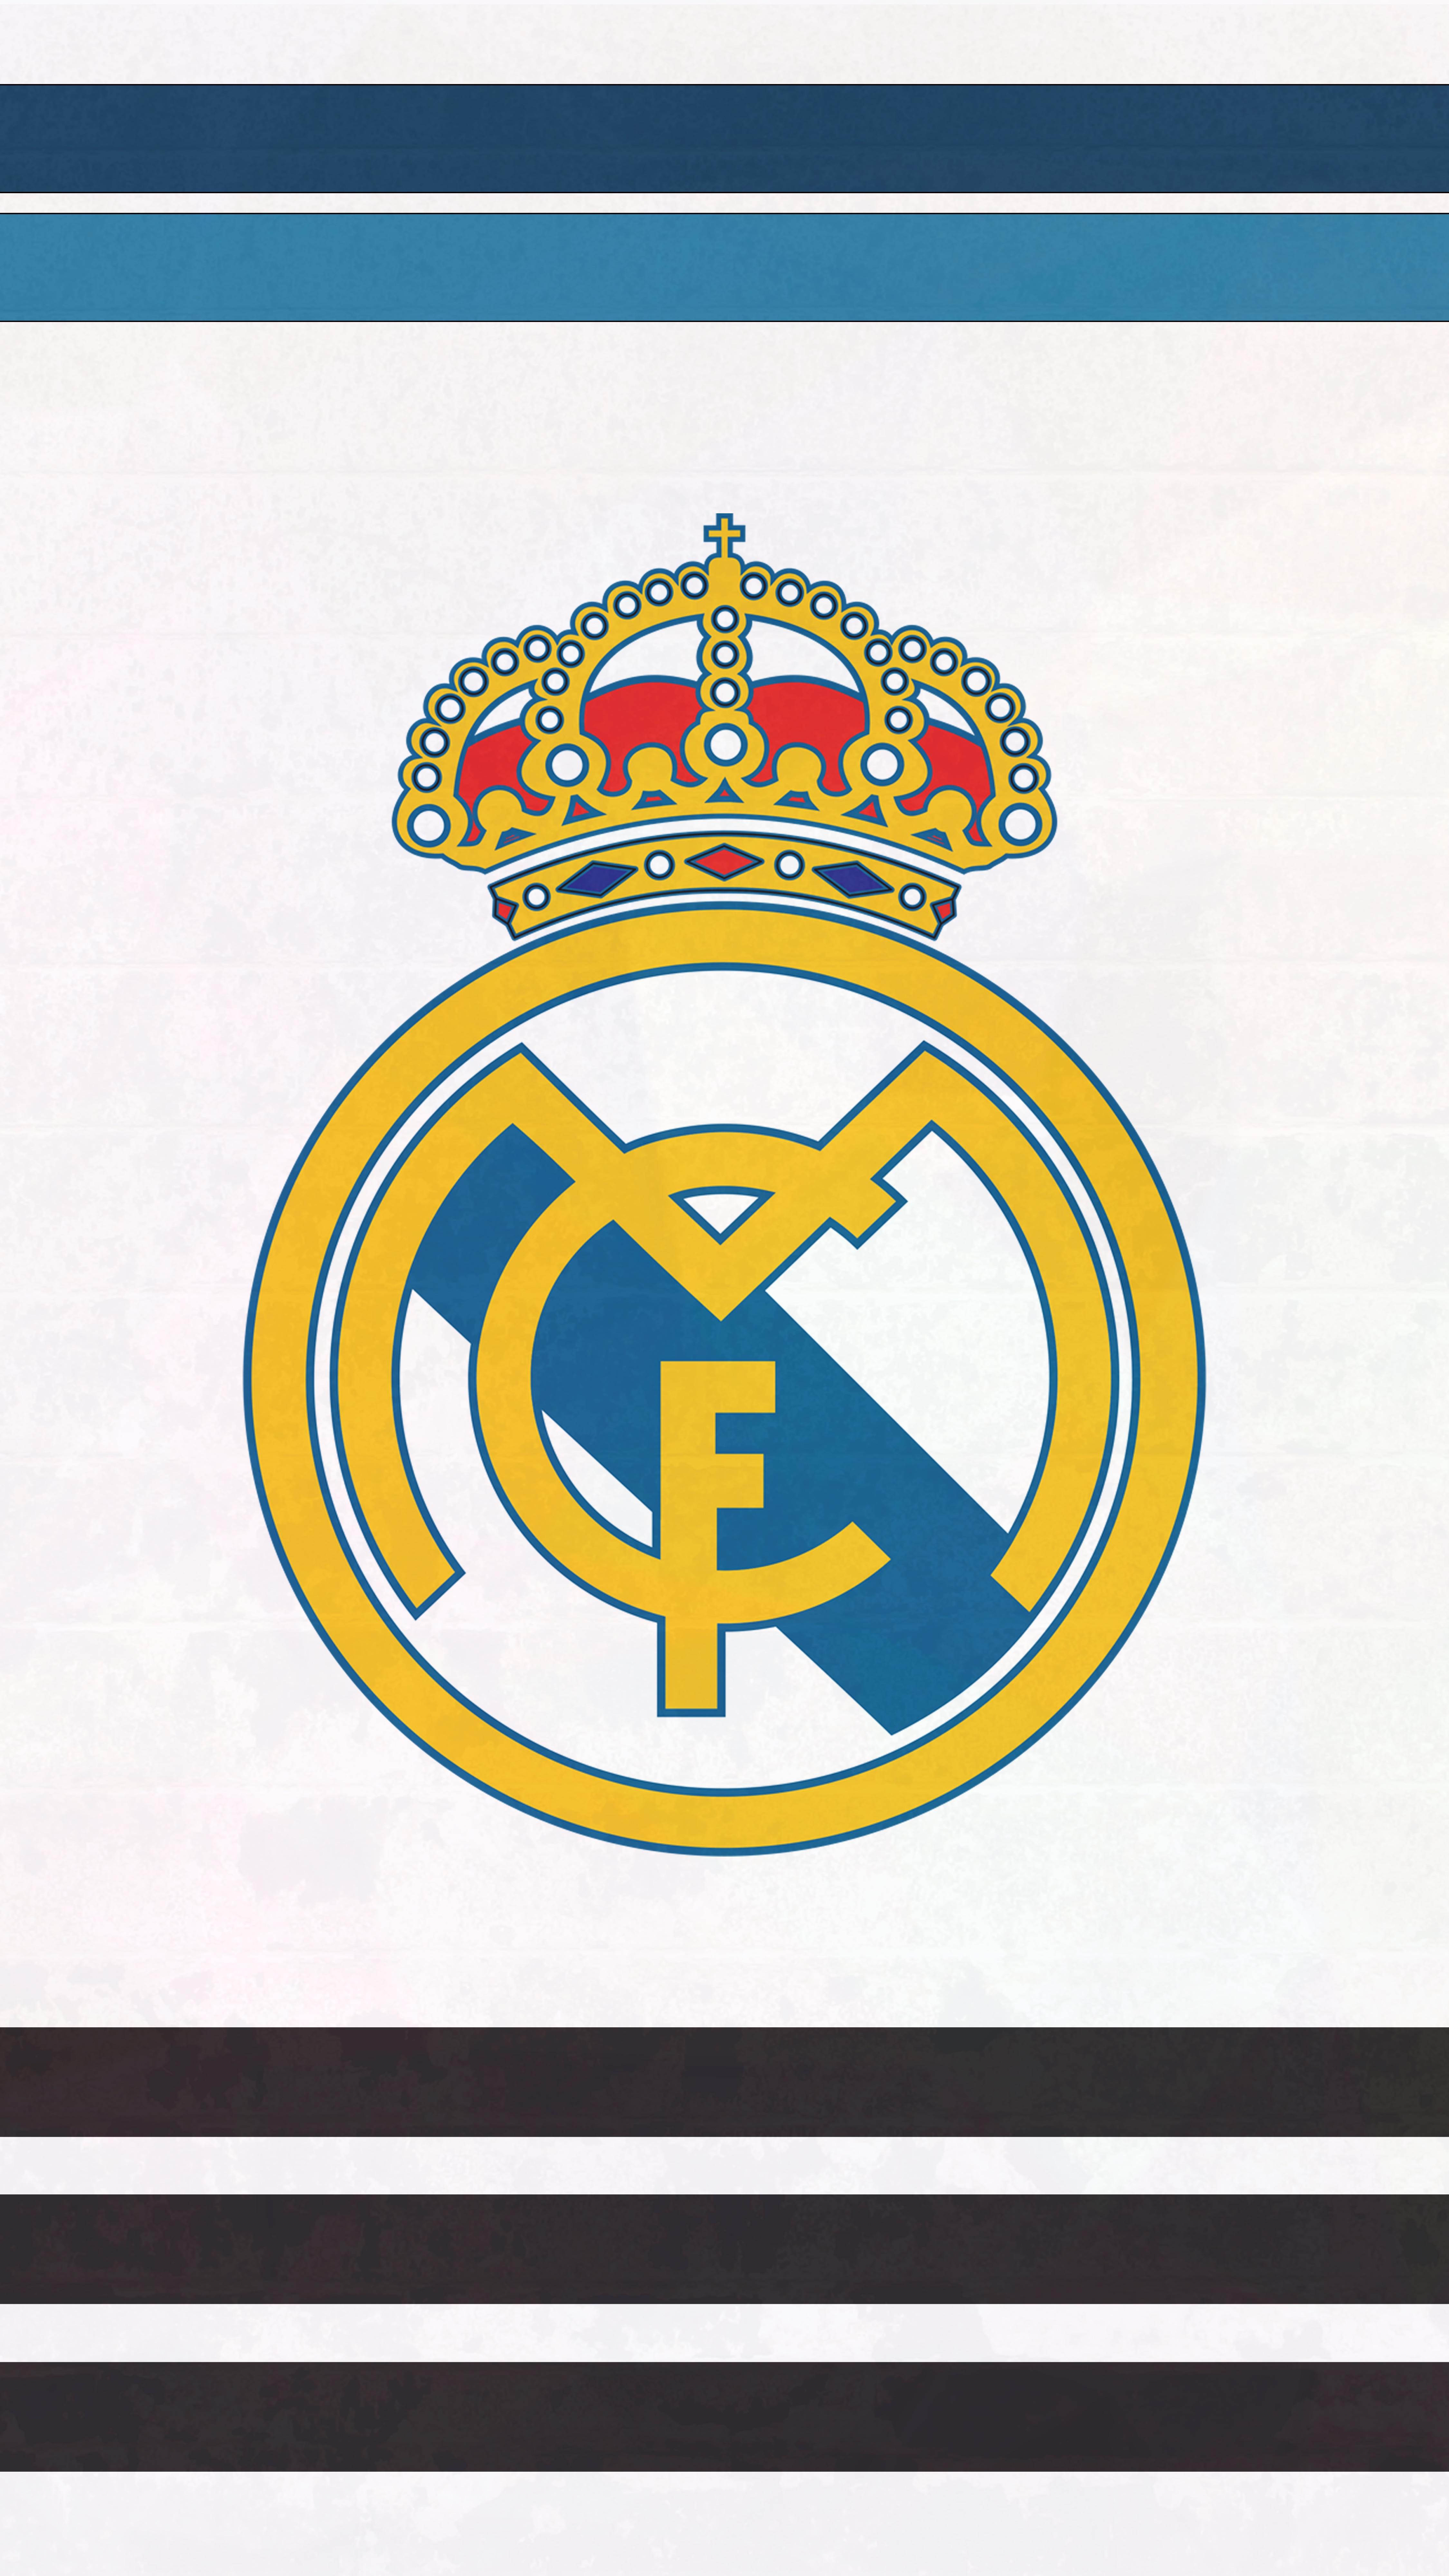 This Real Madrid wallpaper is based on another design I saw